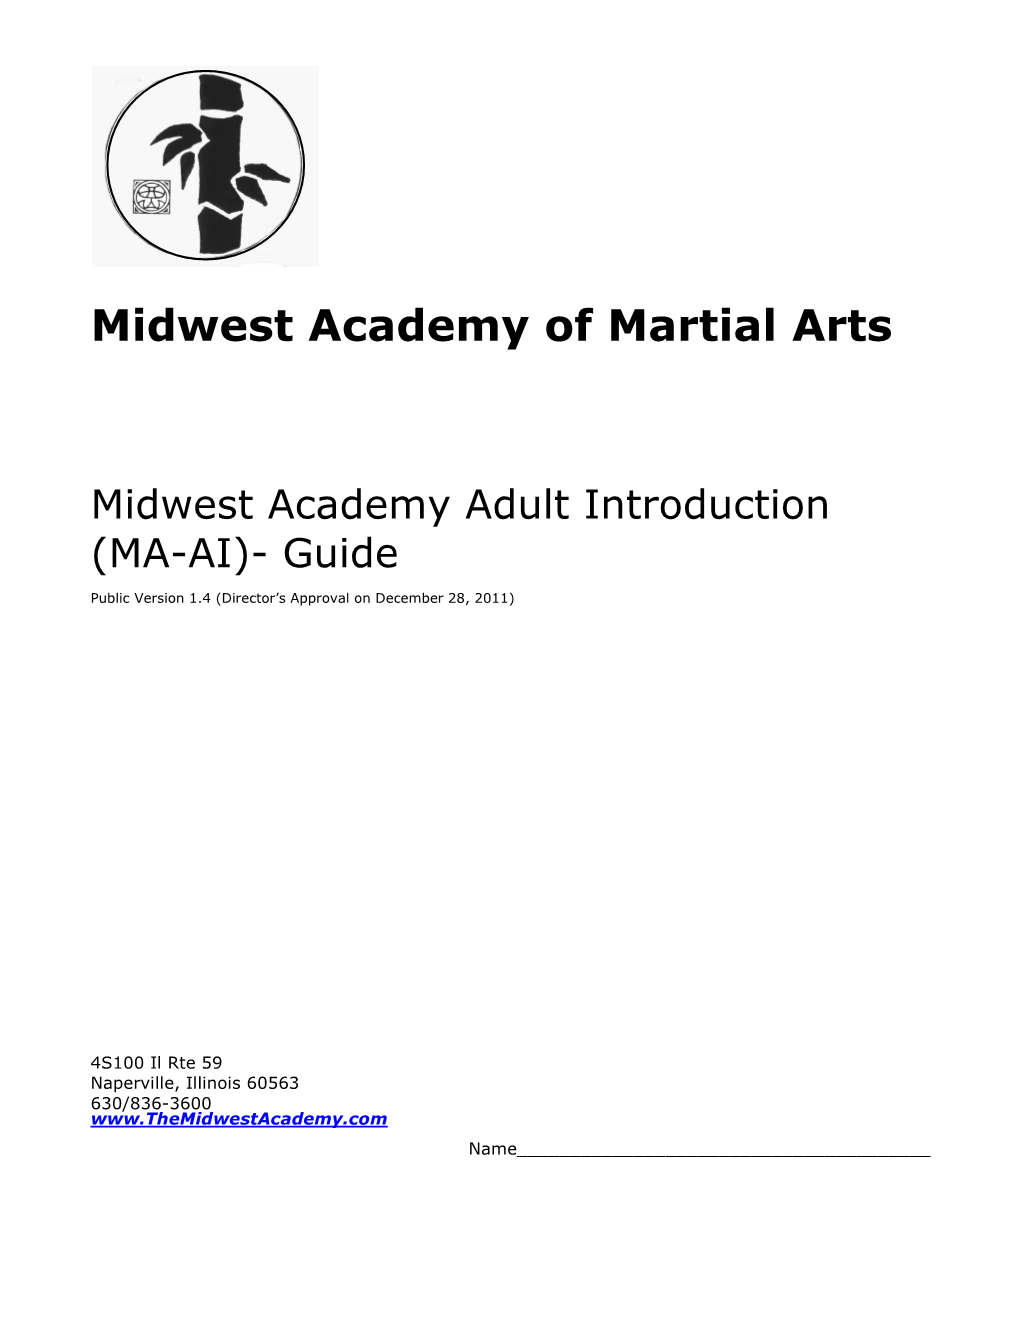 Midwest Academy of Martial Arts